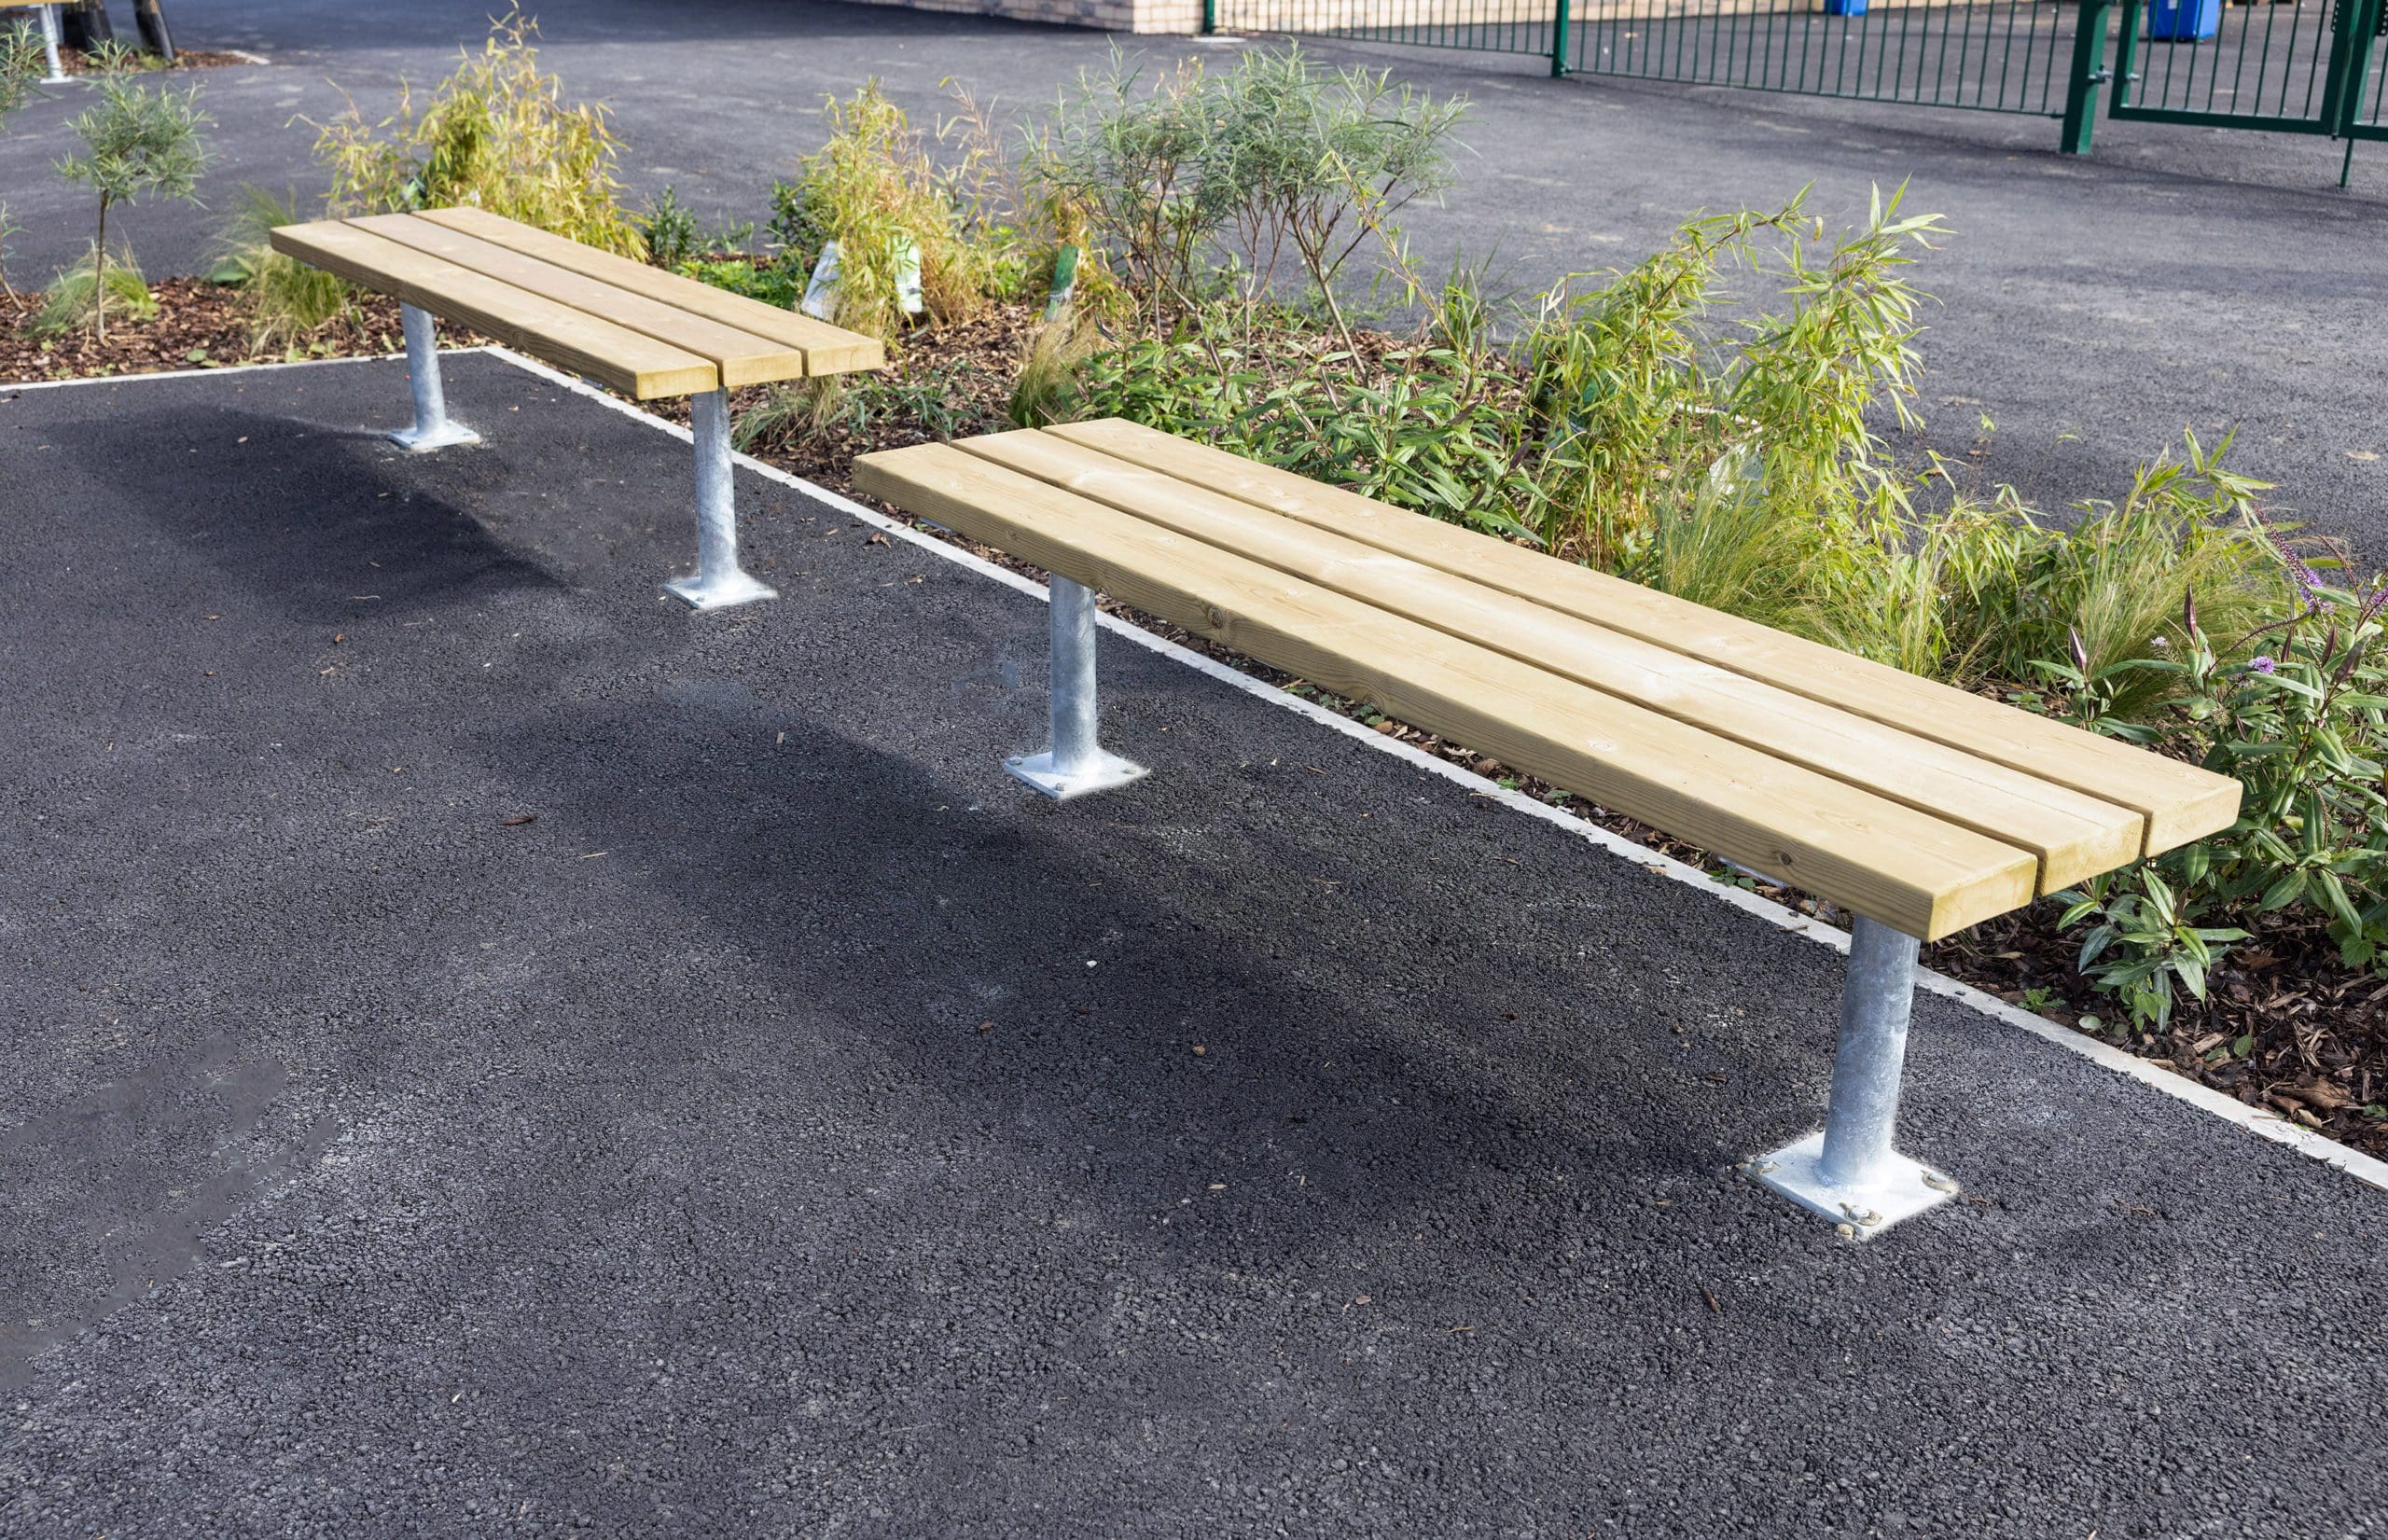 Outdoor rectangular wooden benches with metal legs